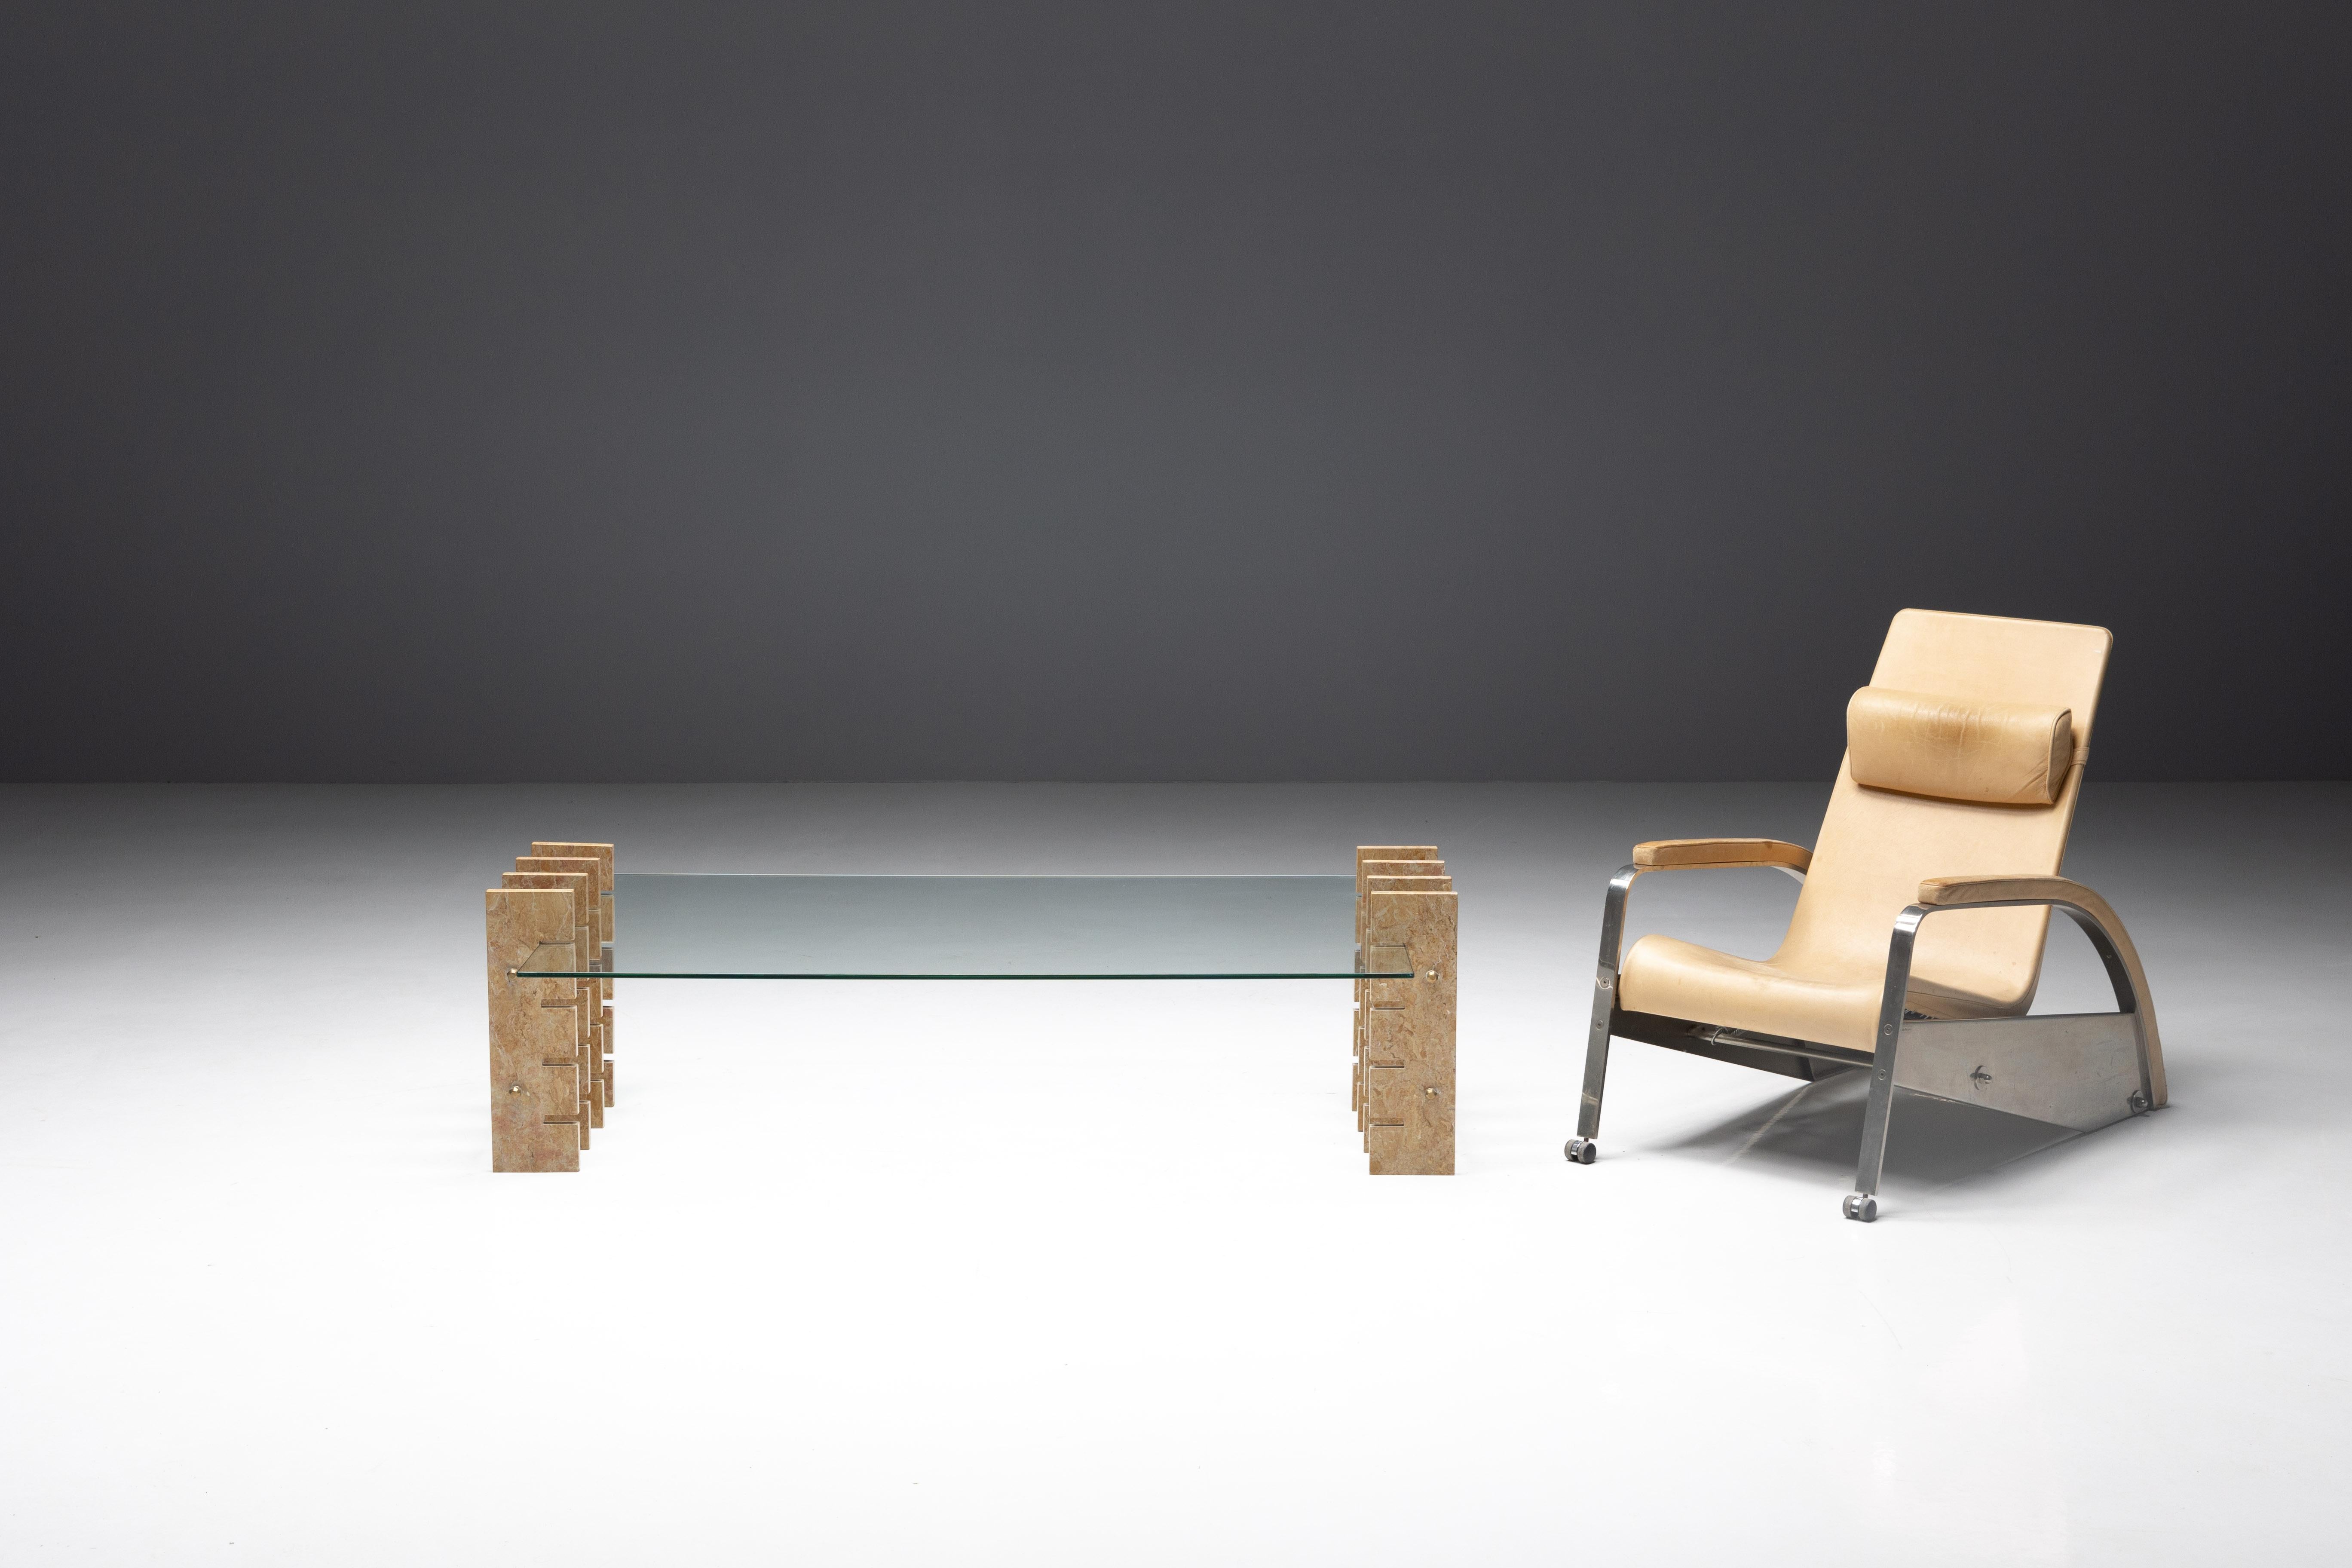 Fitzroy marble coffee table by Gianfranco Ferré, inspired by the sleek aesthetics of the 1970s and reminiscent of mechanical devices. This coffee table boasts a robust structure made of marble and structural bars. It features a coupled clear glass